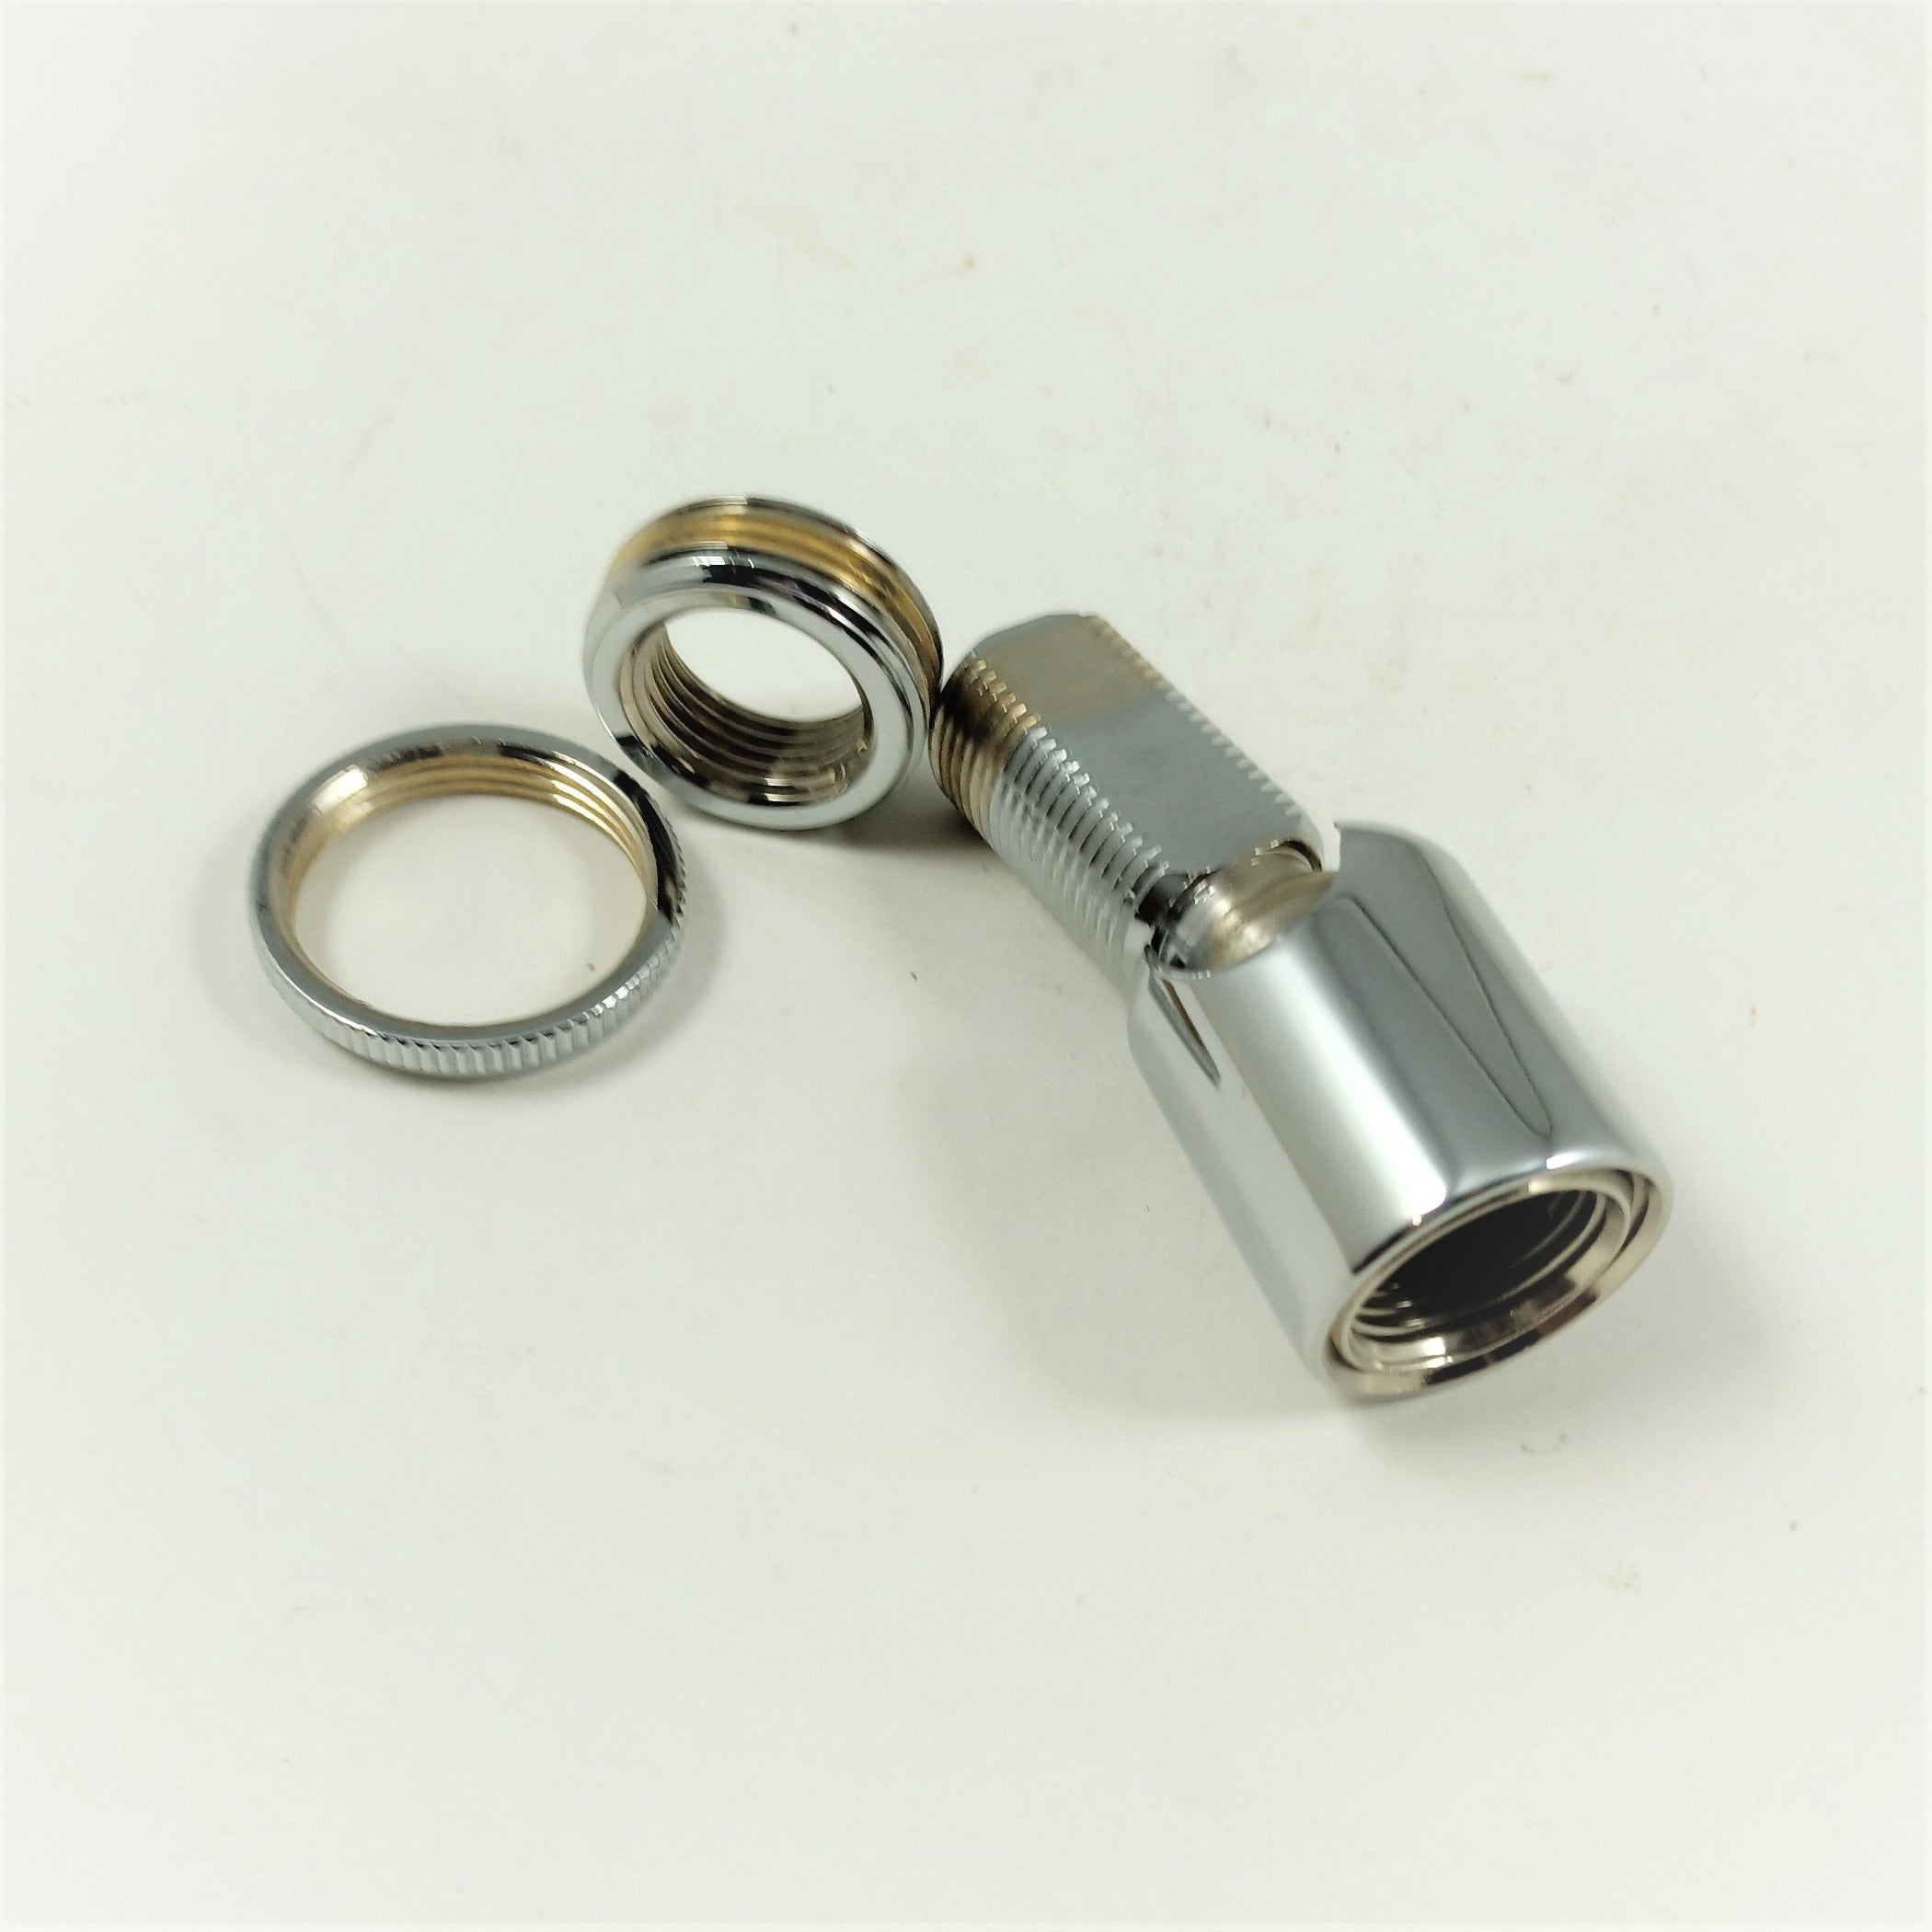 Brass (Nickel Plated Shine) "Hang Straight" Swivel - 3/8 IP x 3/8 IP - 60 Degrees "OUT OF STOCK"